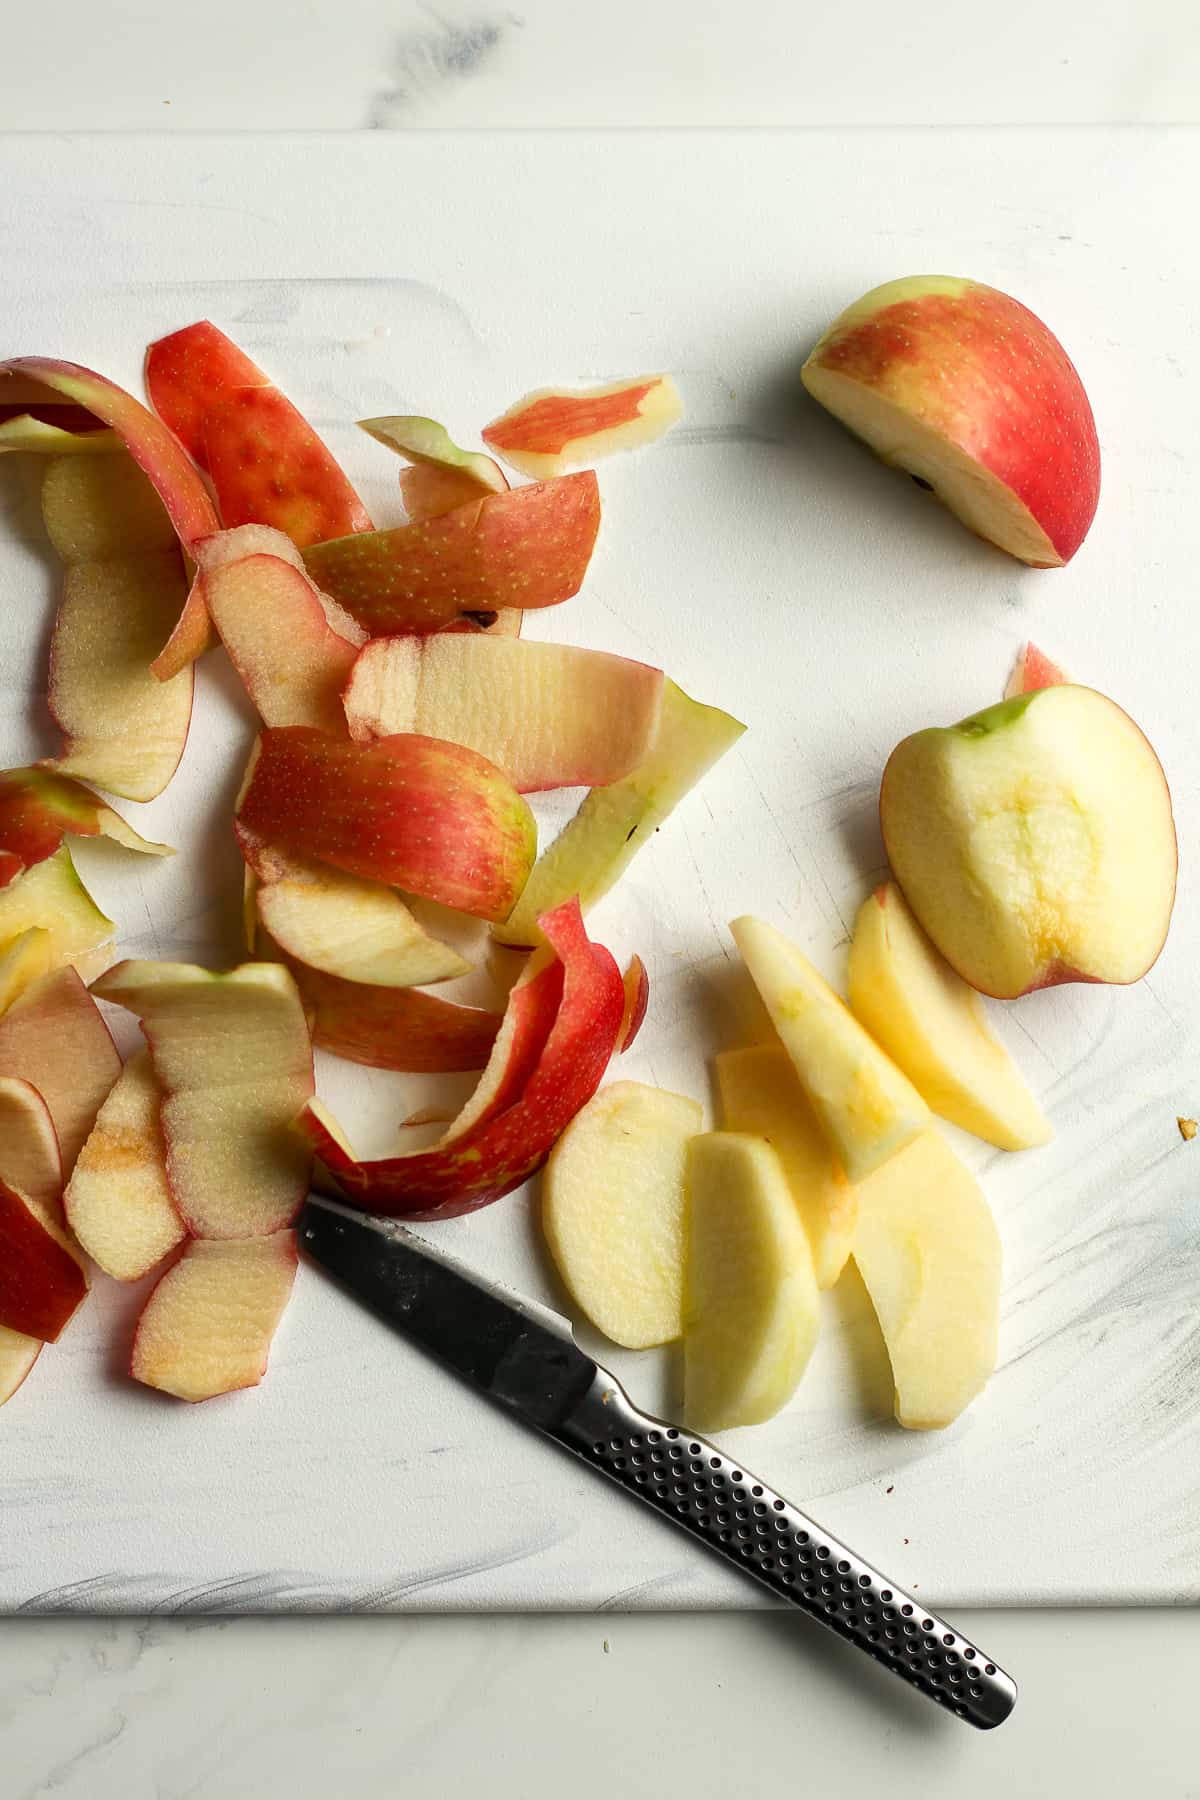 A cutting board with the apple peeling process.